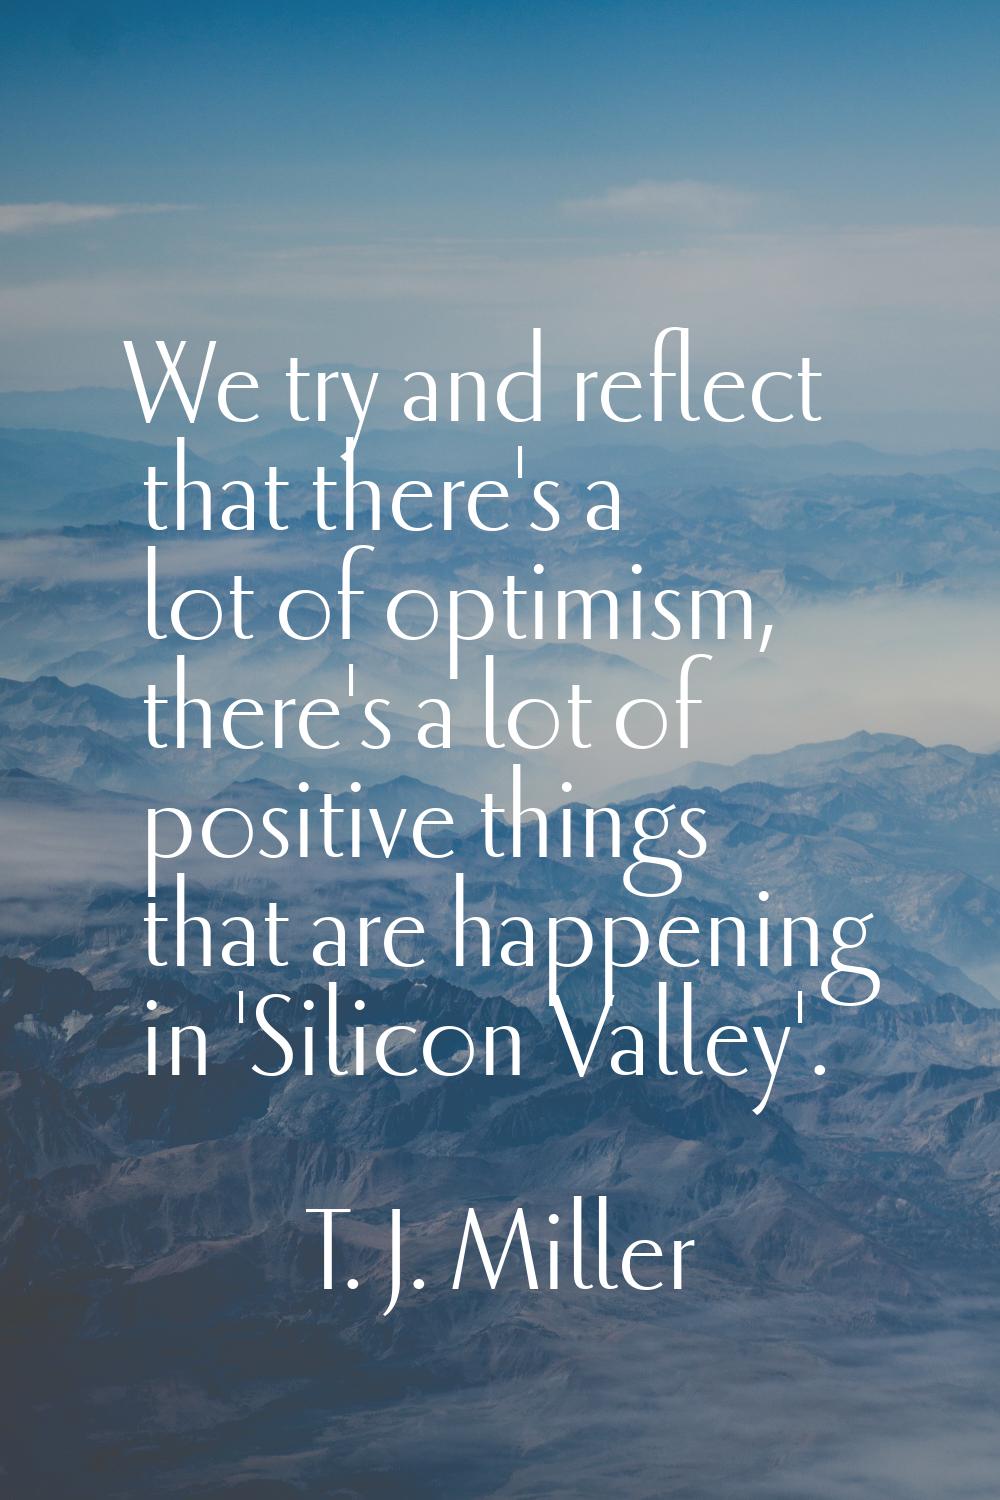 We try and reflect that there's a lot of optimism, there's a lot of positive things that are happen